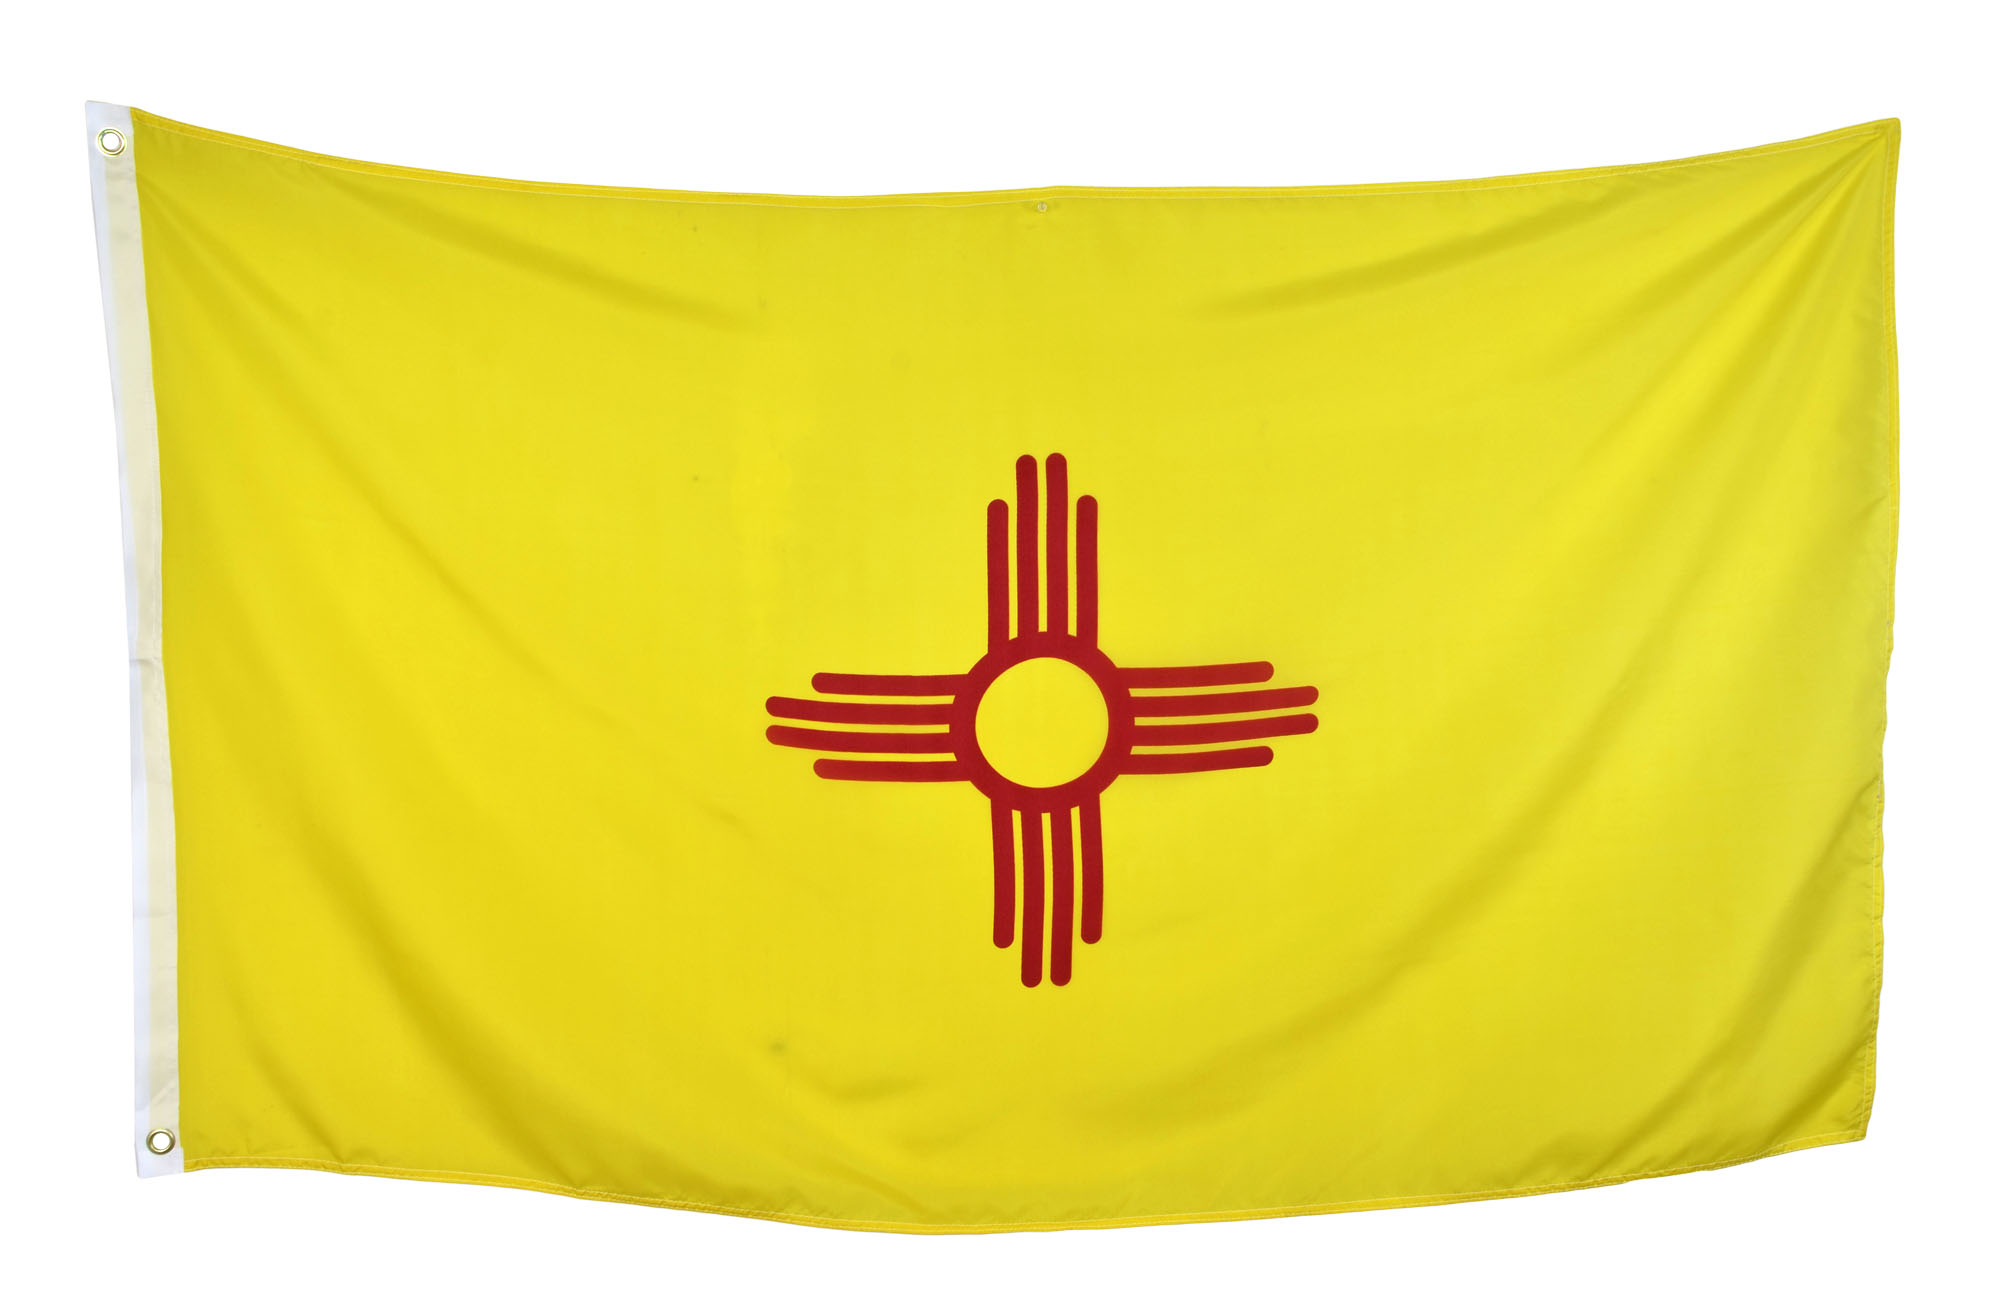 Shop72 New Mexico Flags 3x5' Sturdy Polyester Brass Grommets Double Stitched